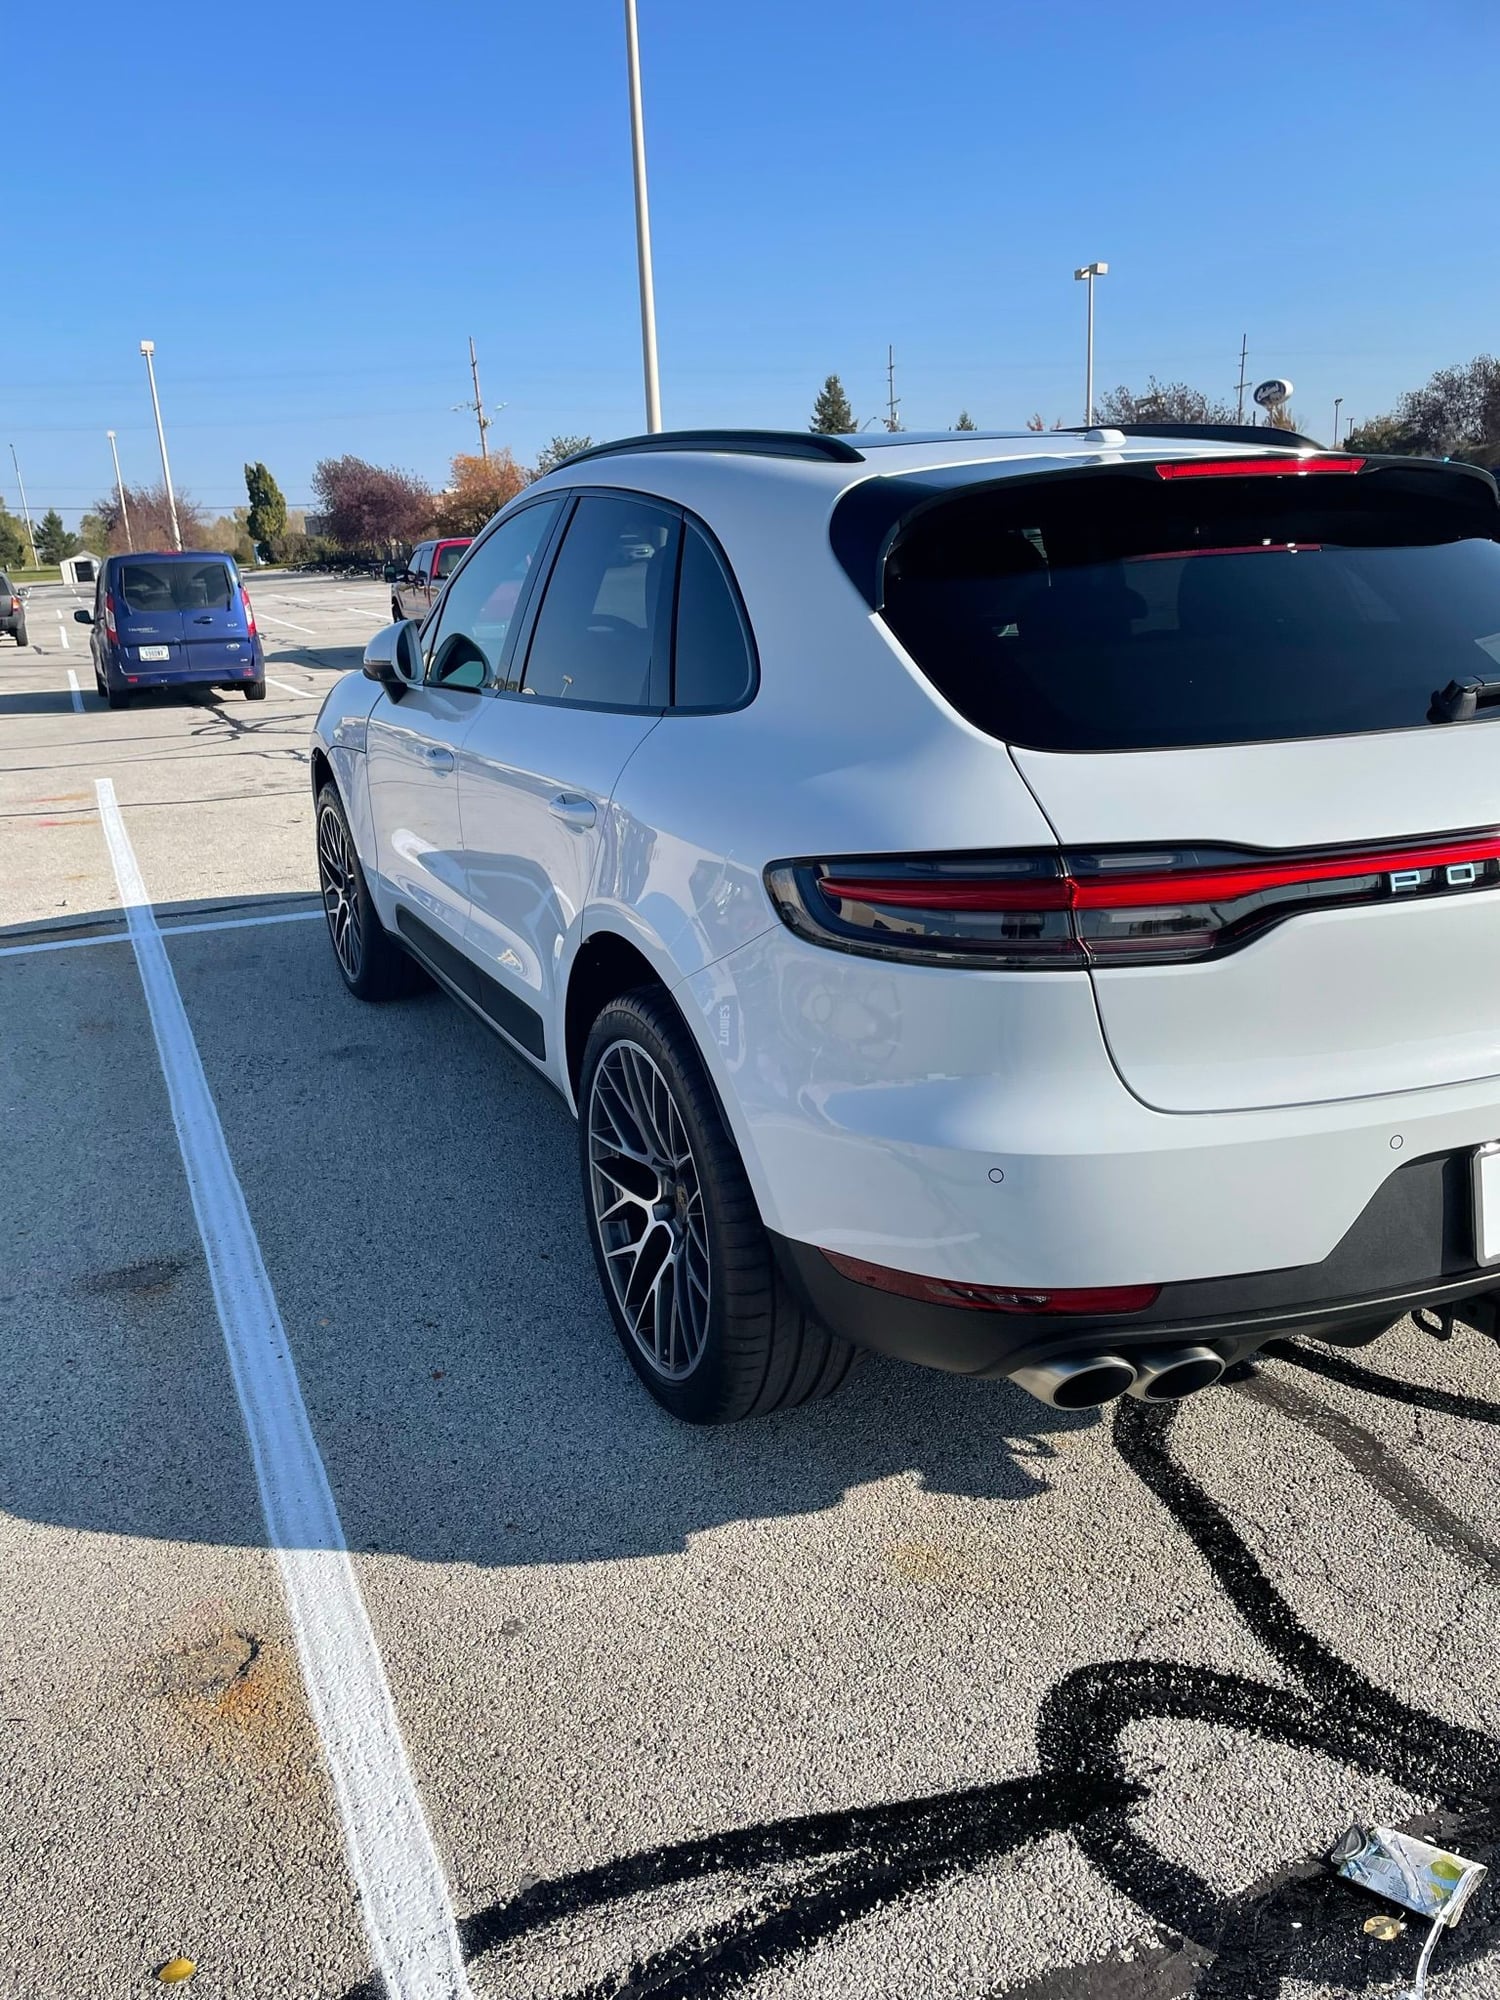 2021 Porsche Macan - Selling 2021 Macan S white w black interior - Used - VIN WP1AB2A56MLB35782 - 5,100 Miles - AWD - Automatic - SUV - White - Crown Point, IN 46307, United States